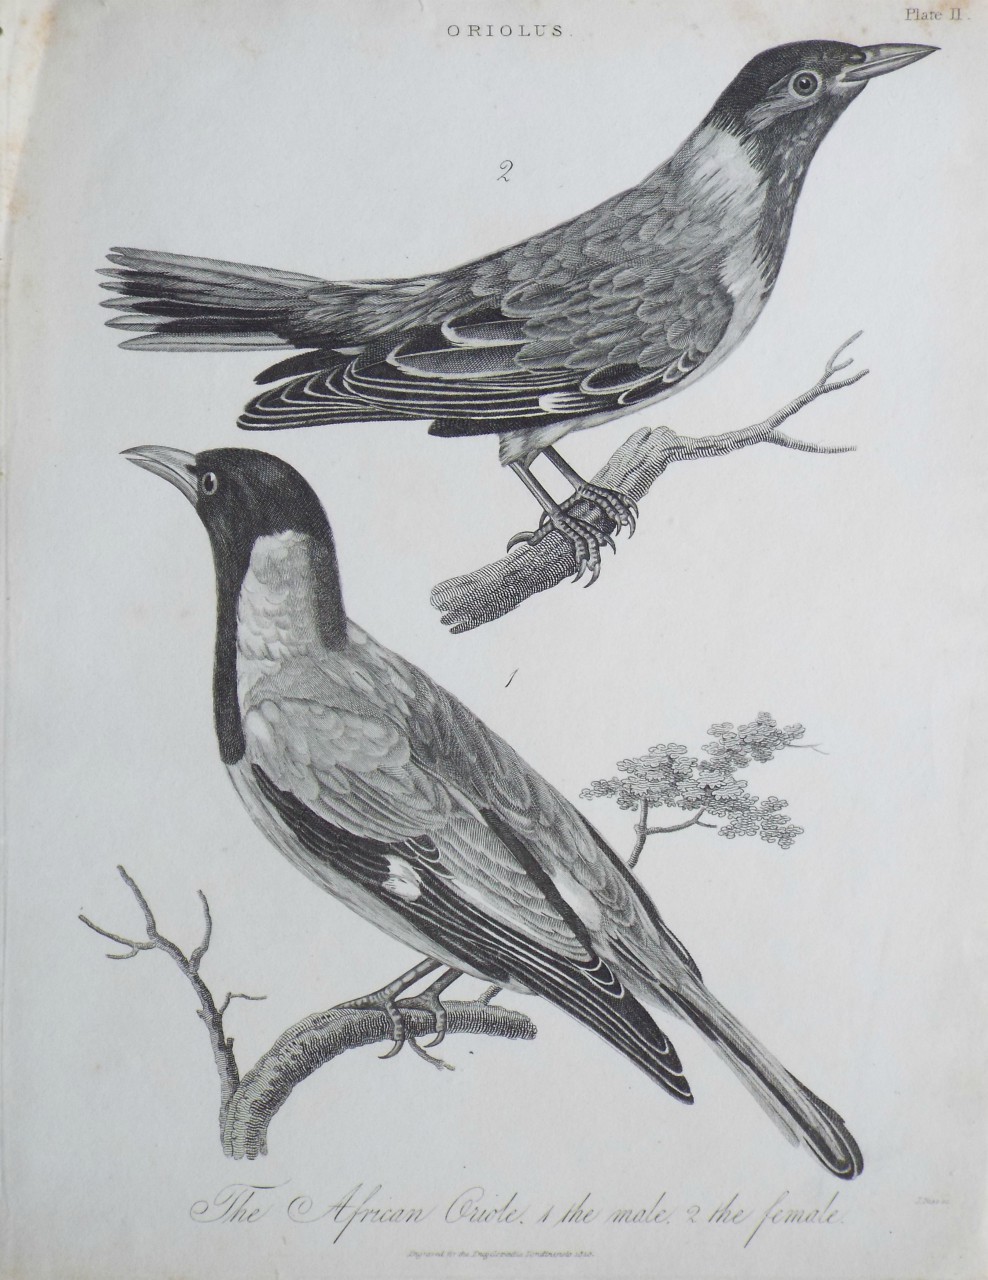 Print - Oriolus. The African Oriole. 1 the male, 2 the female. - Pass